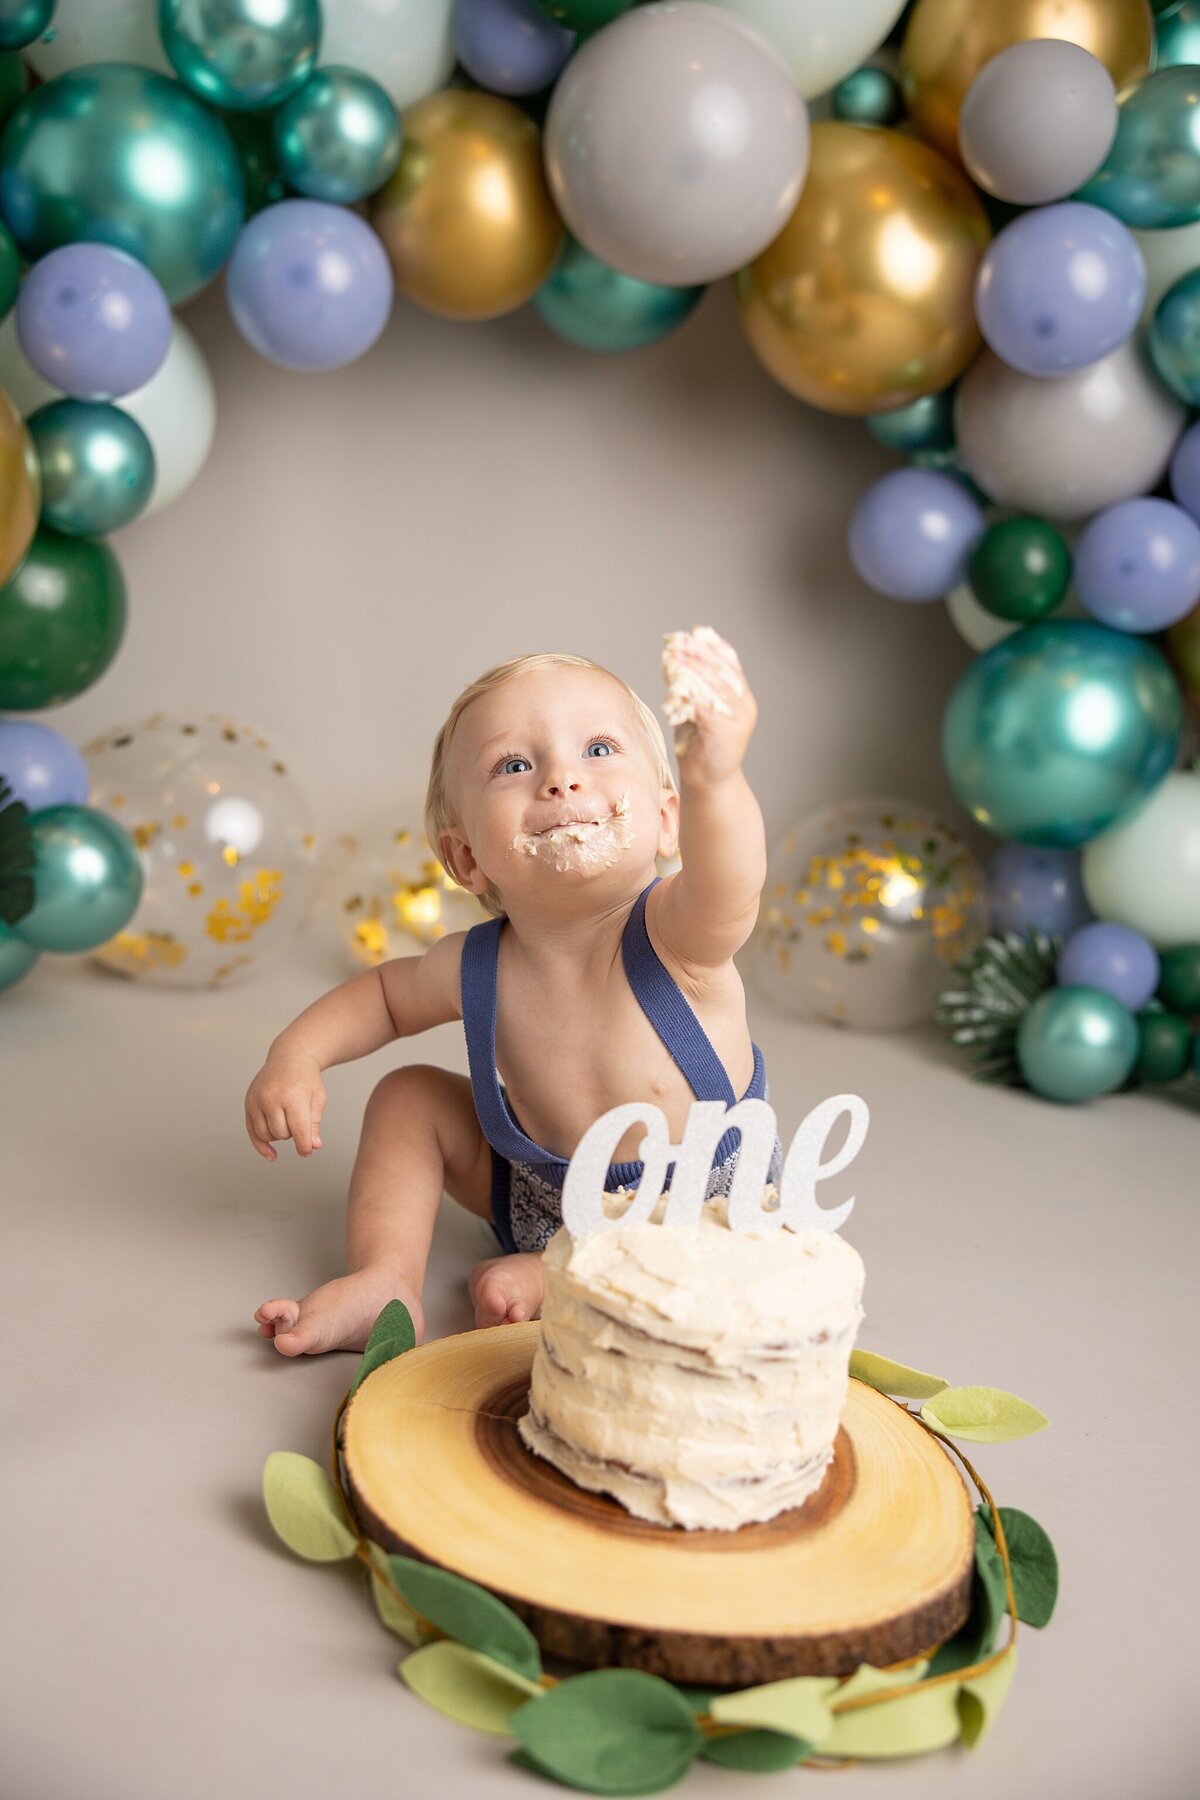 baby boy offering cake to photographer with leaves around cake